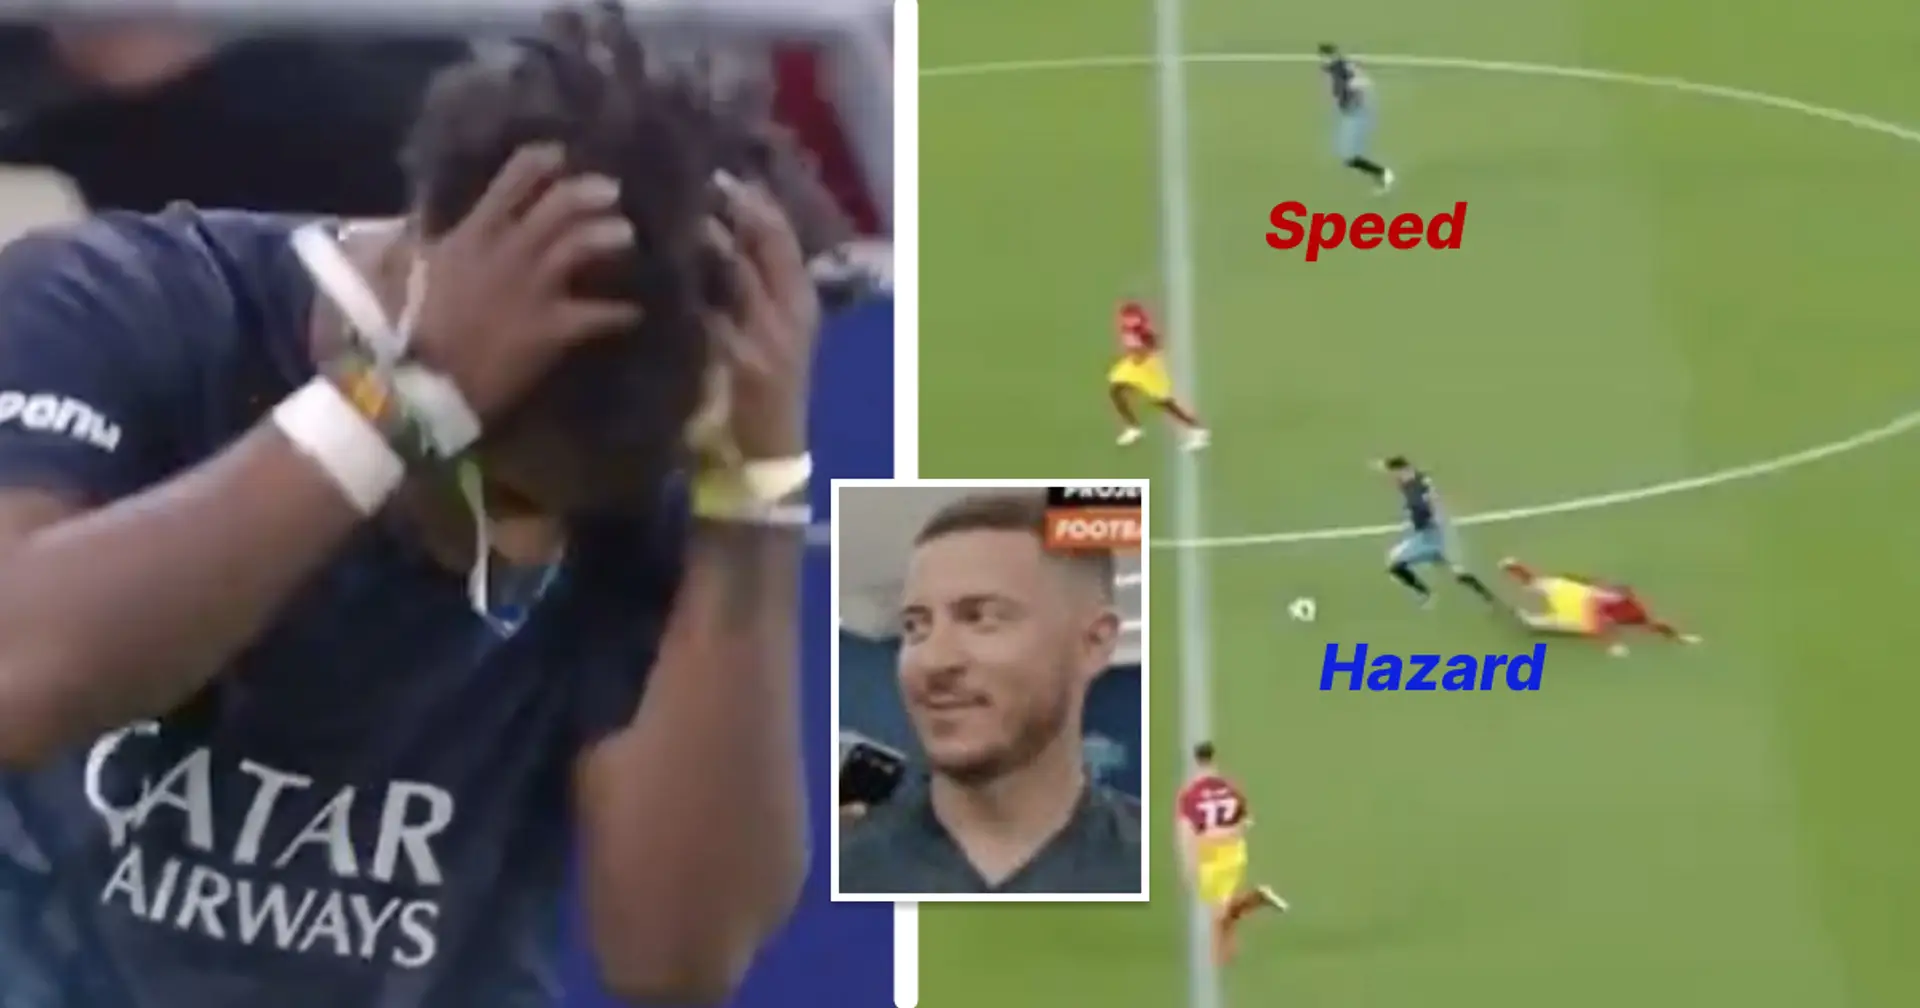 Eden Hazard lays ball on plate after splendid run in charity match – only for Speed to ruin it